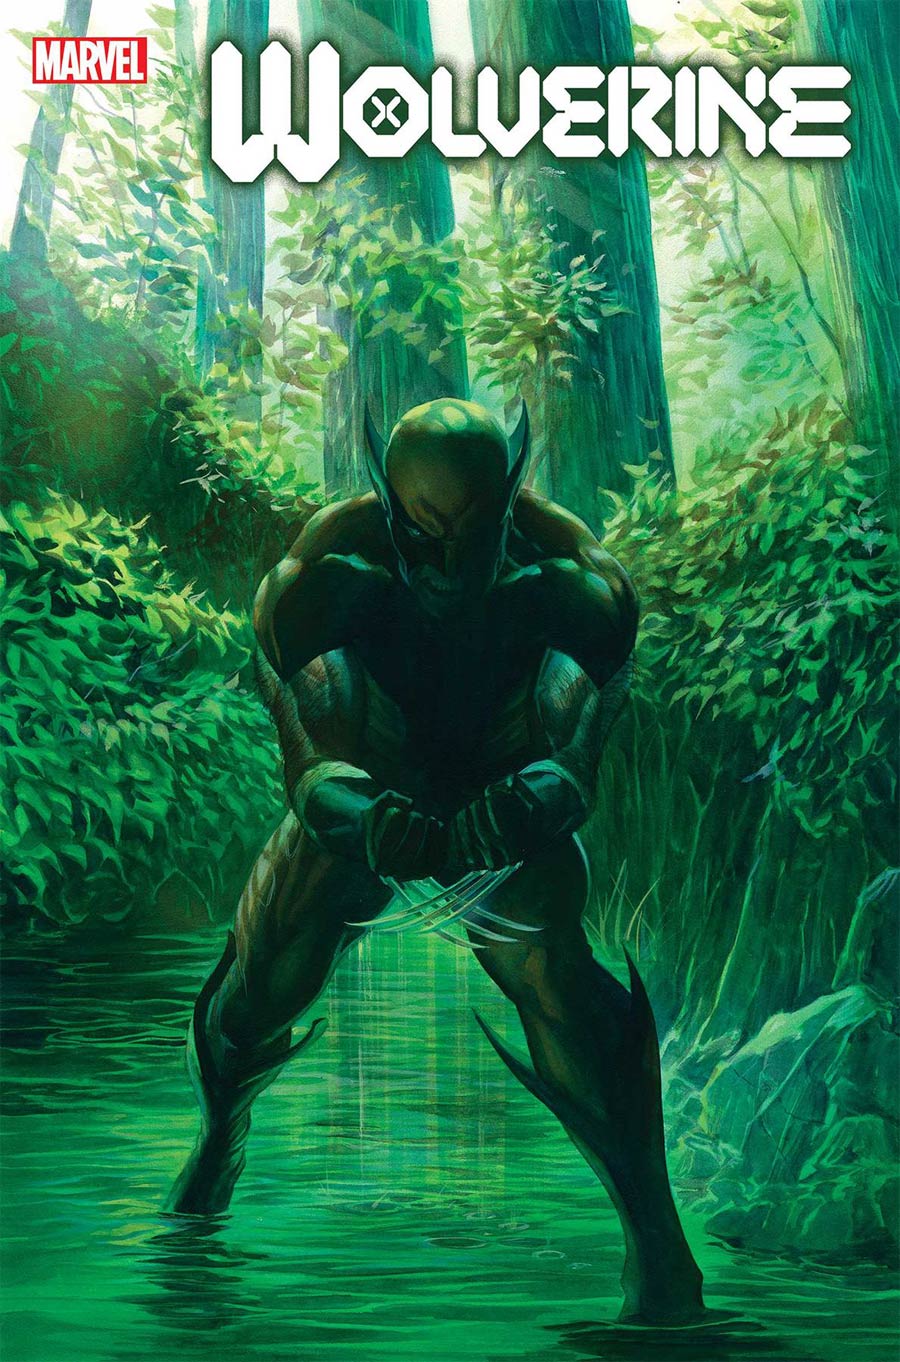 Wolverine Vol 7 #1 By Alex Ross Poster